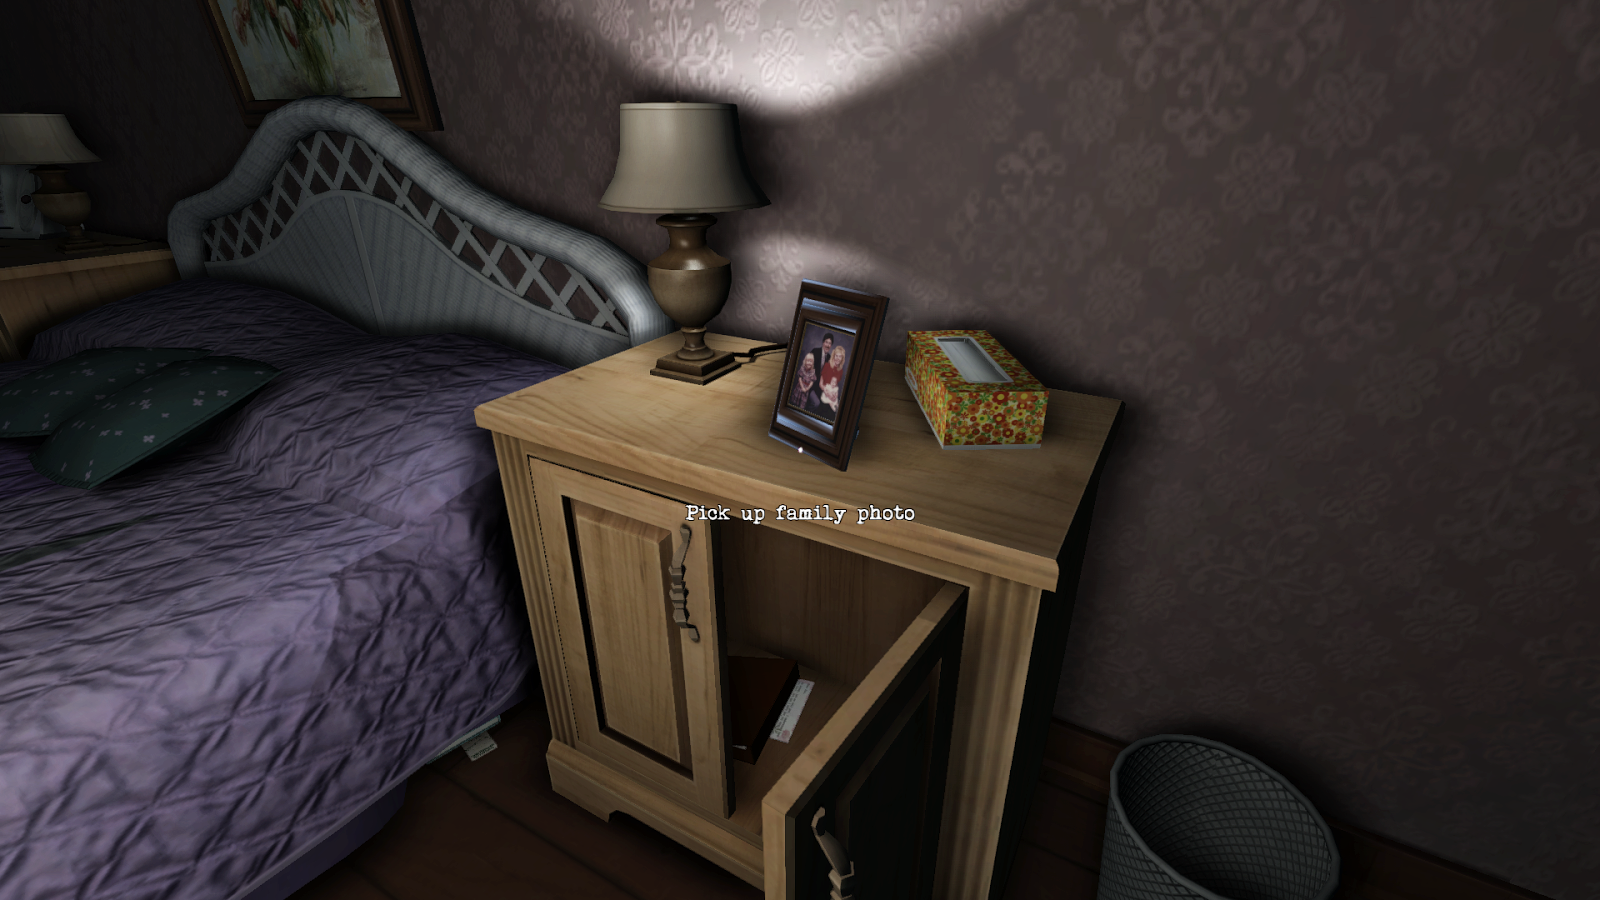 Gone home игра. Gone Home ps4. Gone Home геймплей.